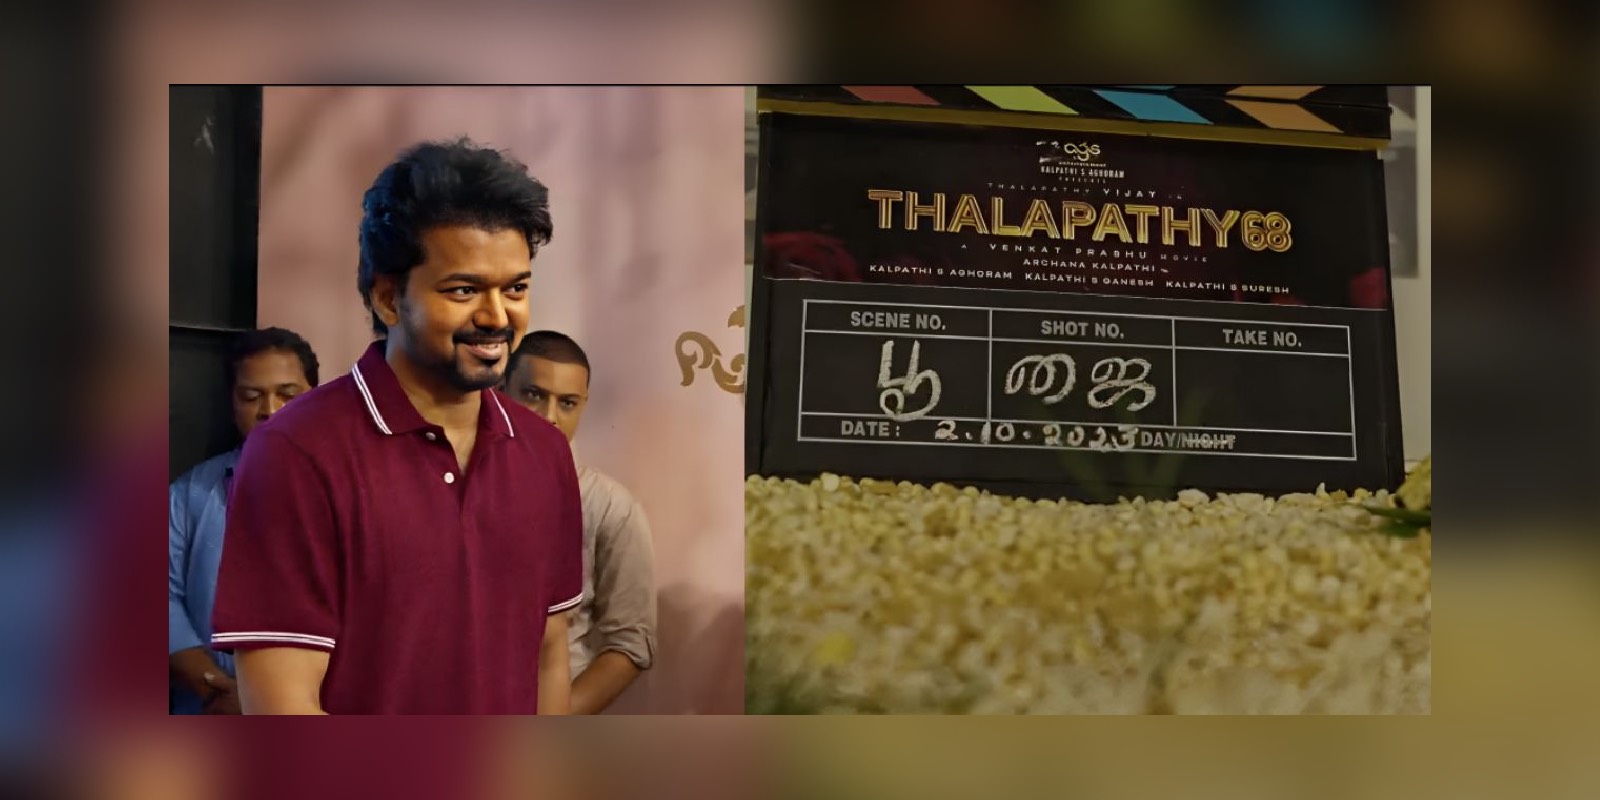 Thalapathy68 goes on floors